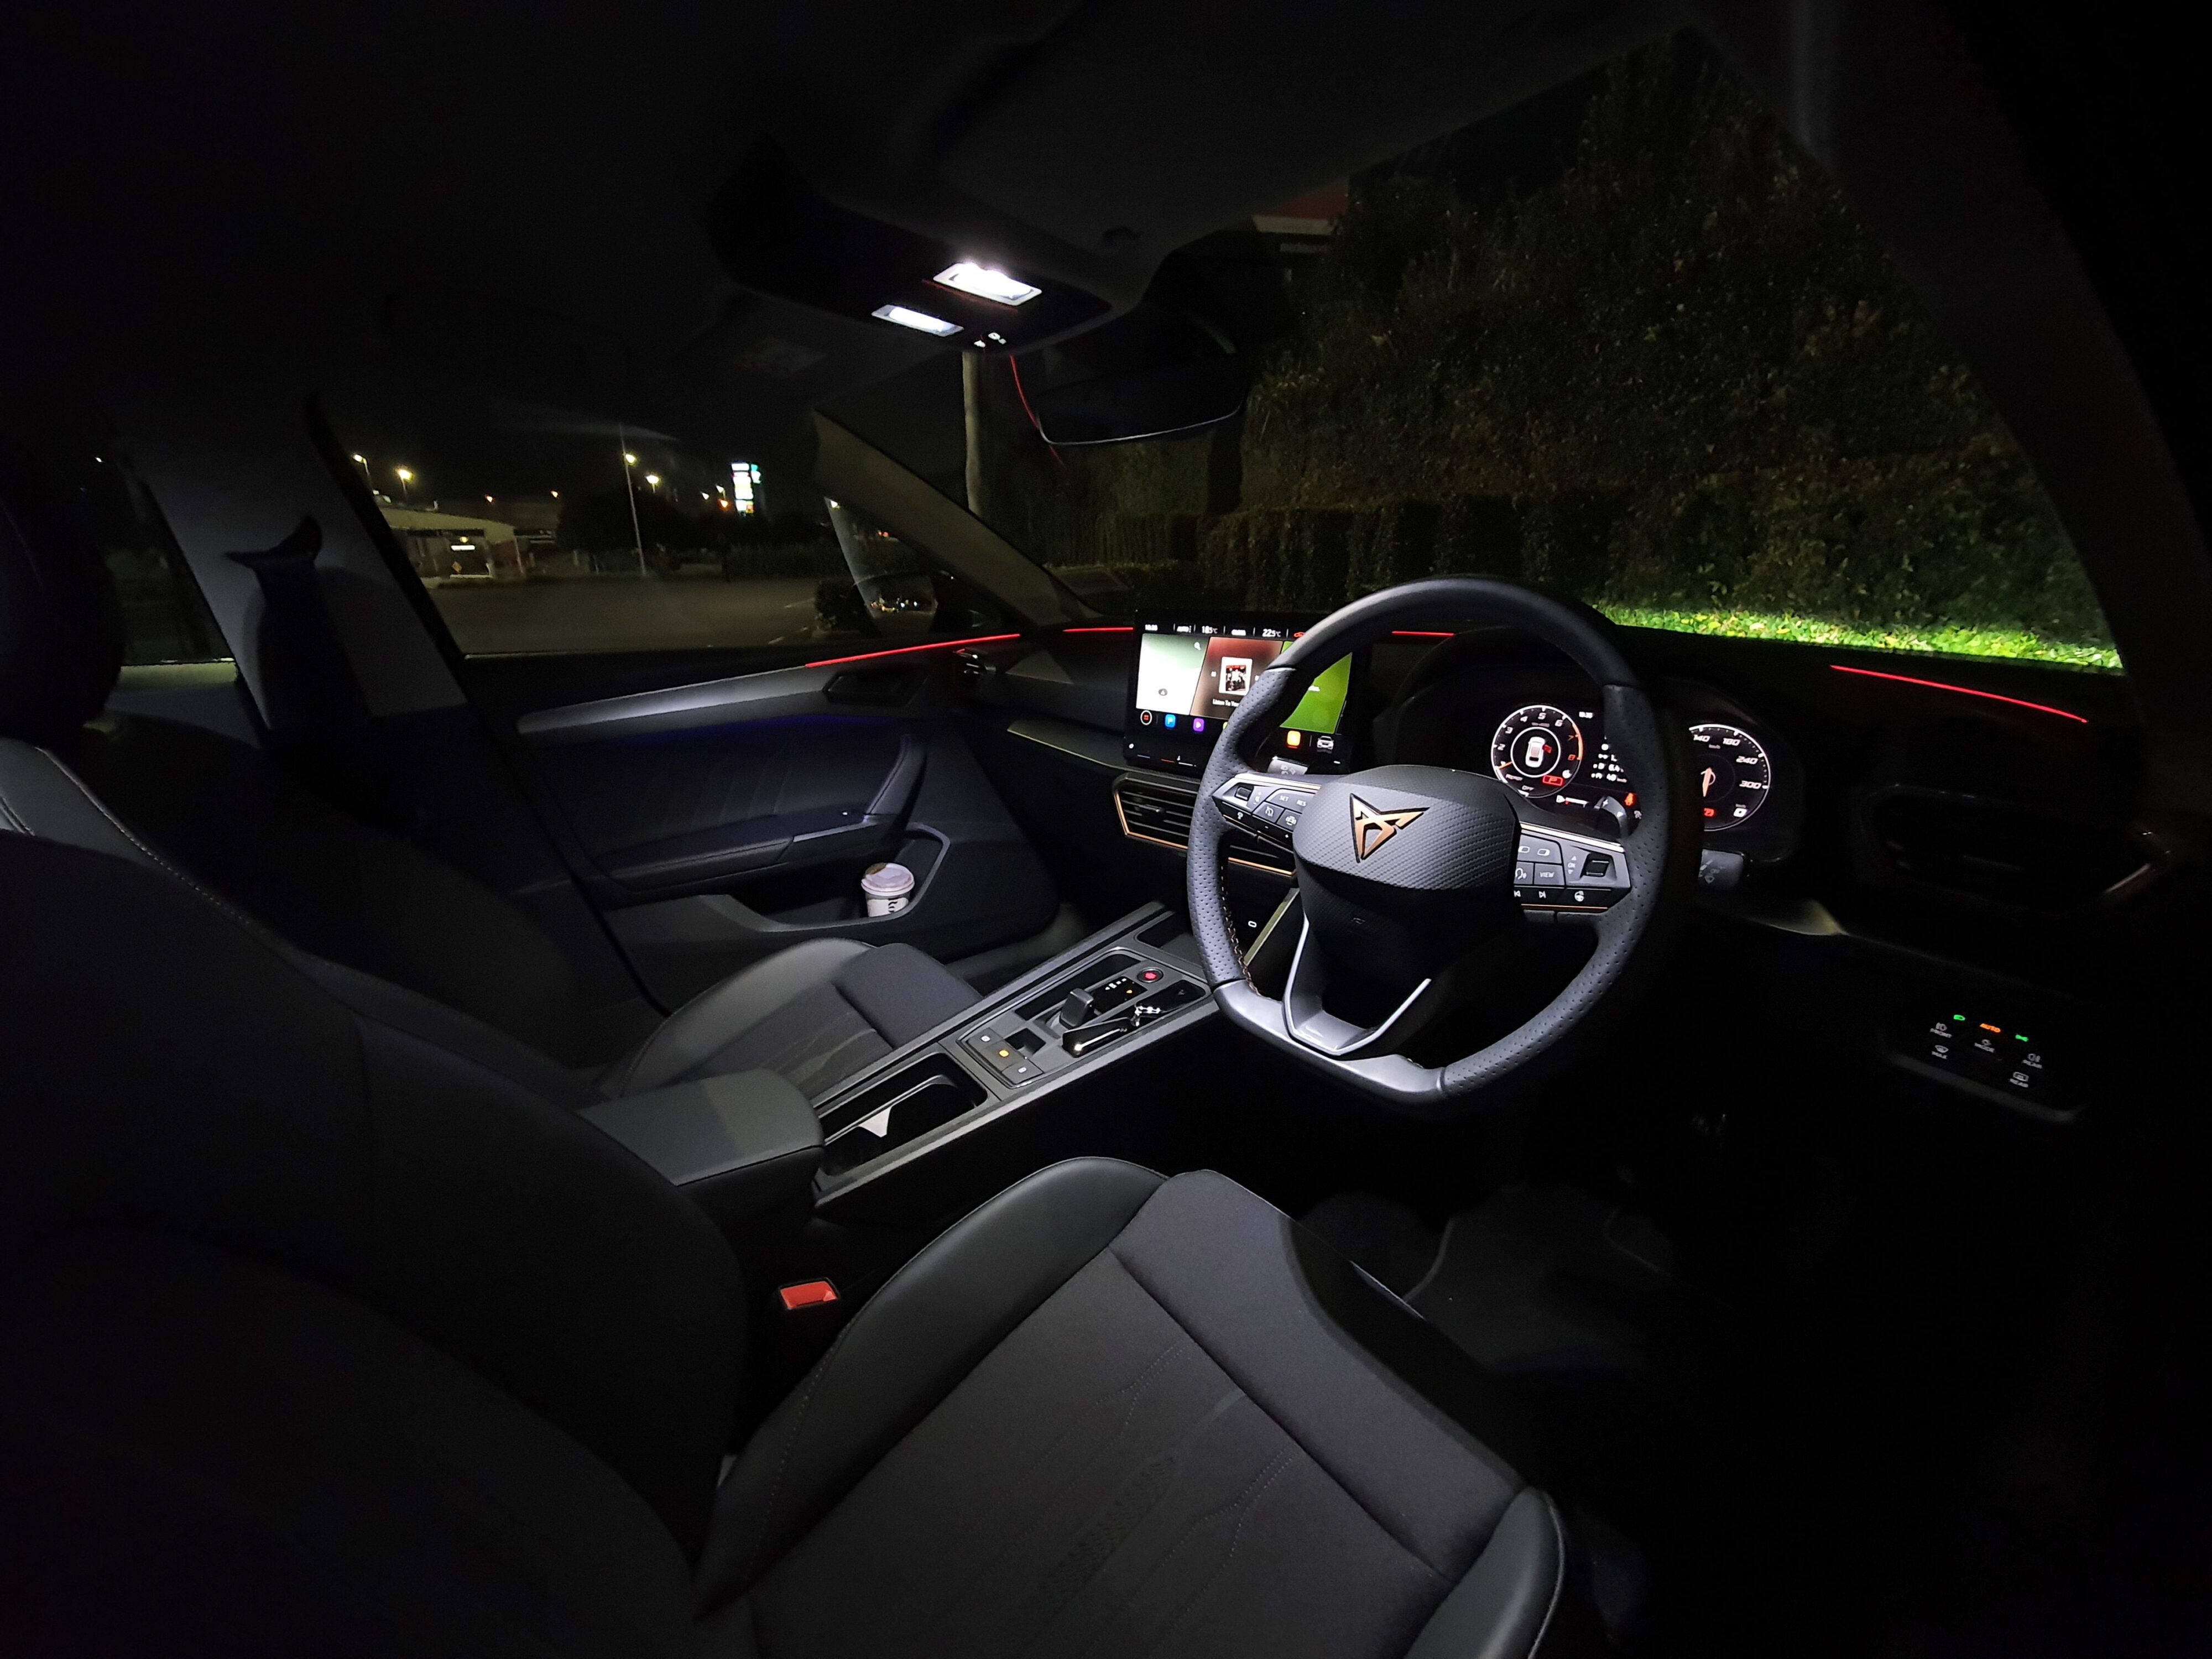 Interior of a 2023 Cupra Leon V Sports Tourer, photographed at night.